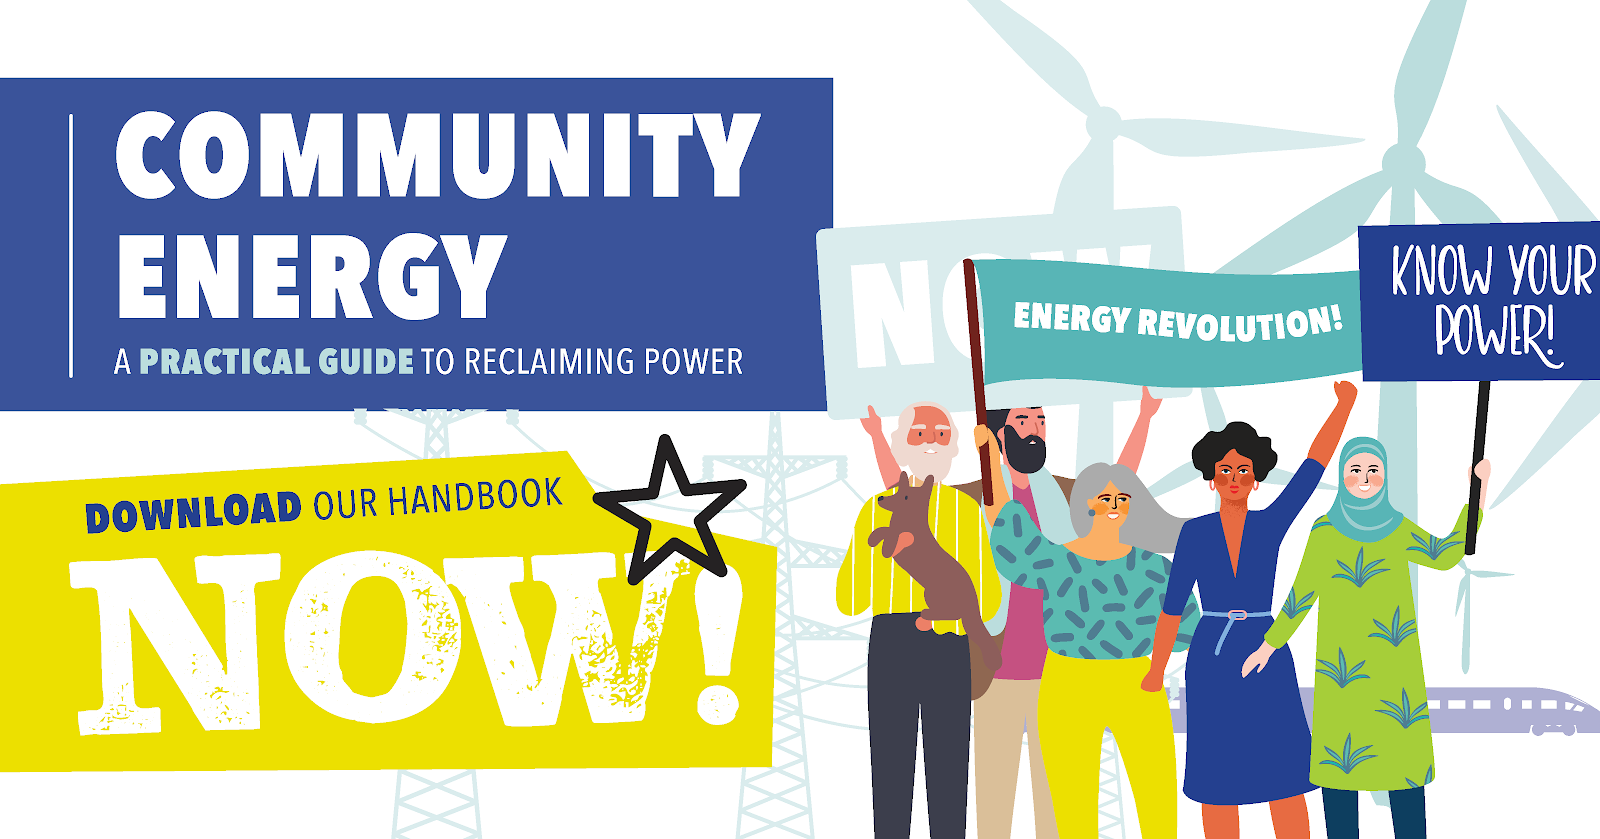 Community Energy: A practical guide to reclaiming power